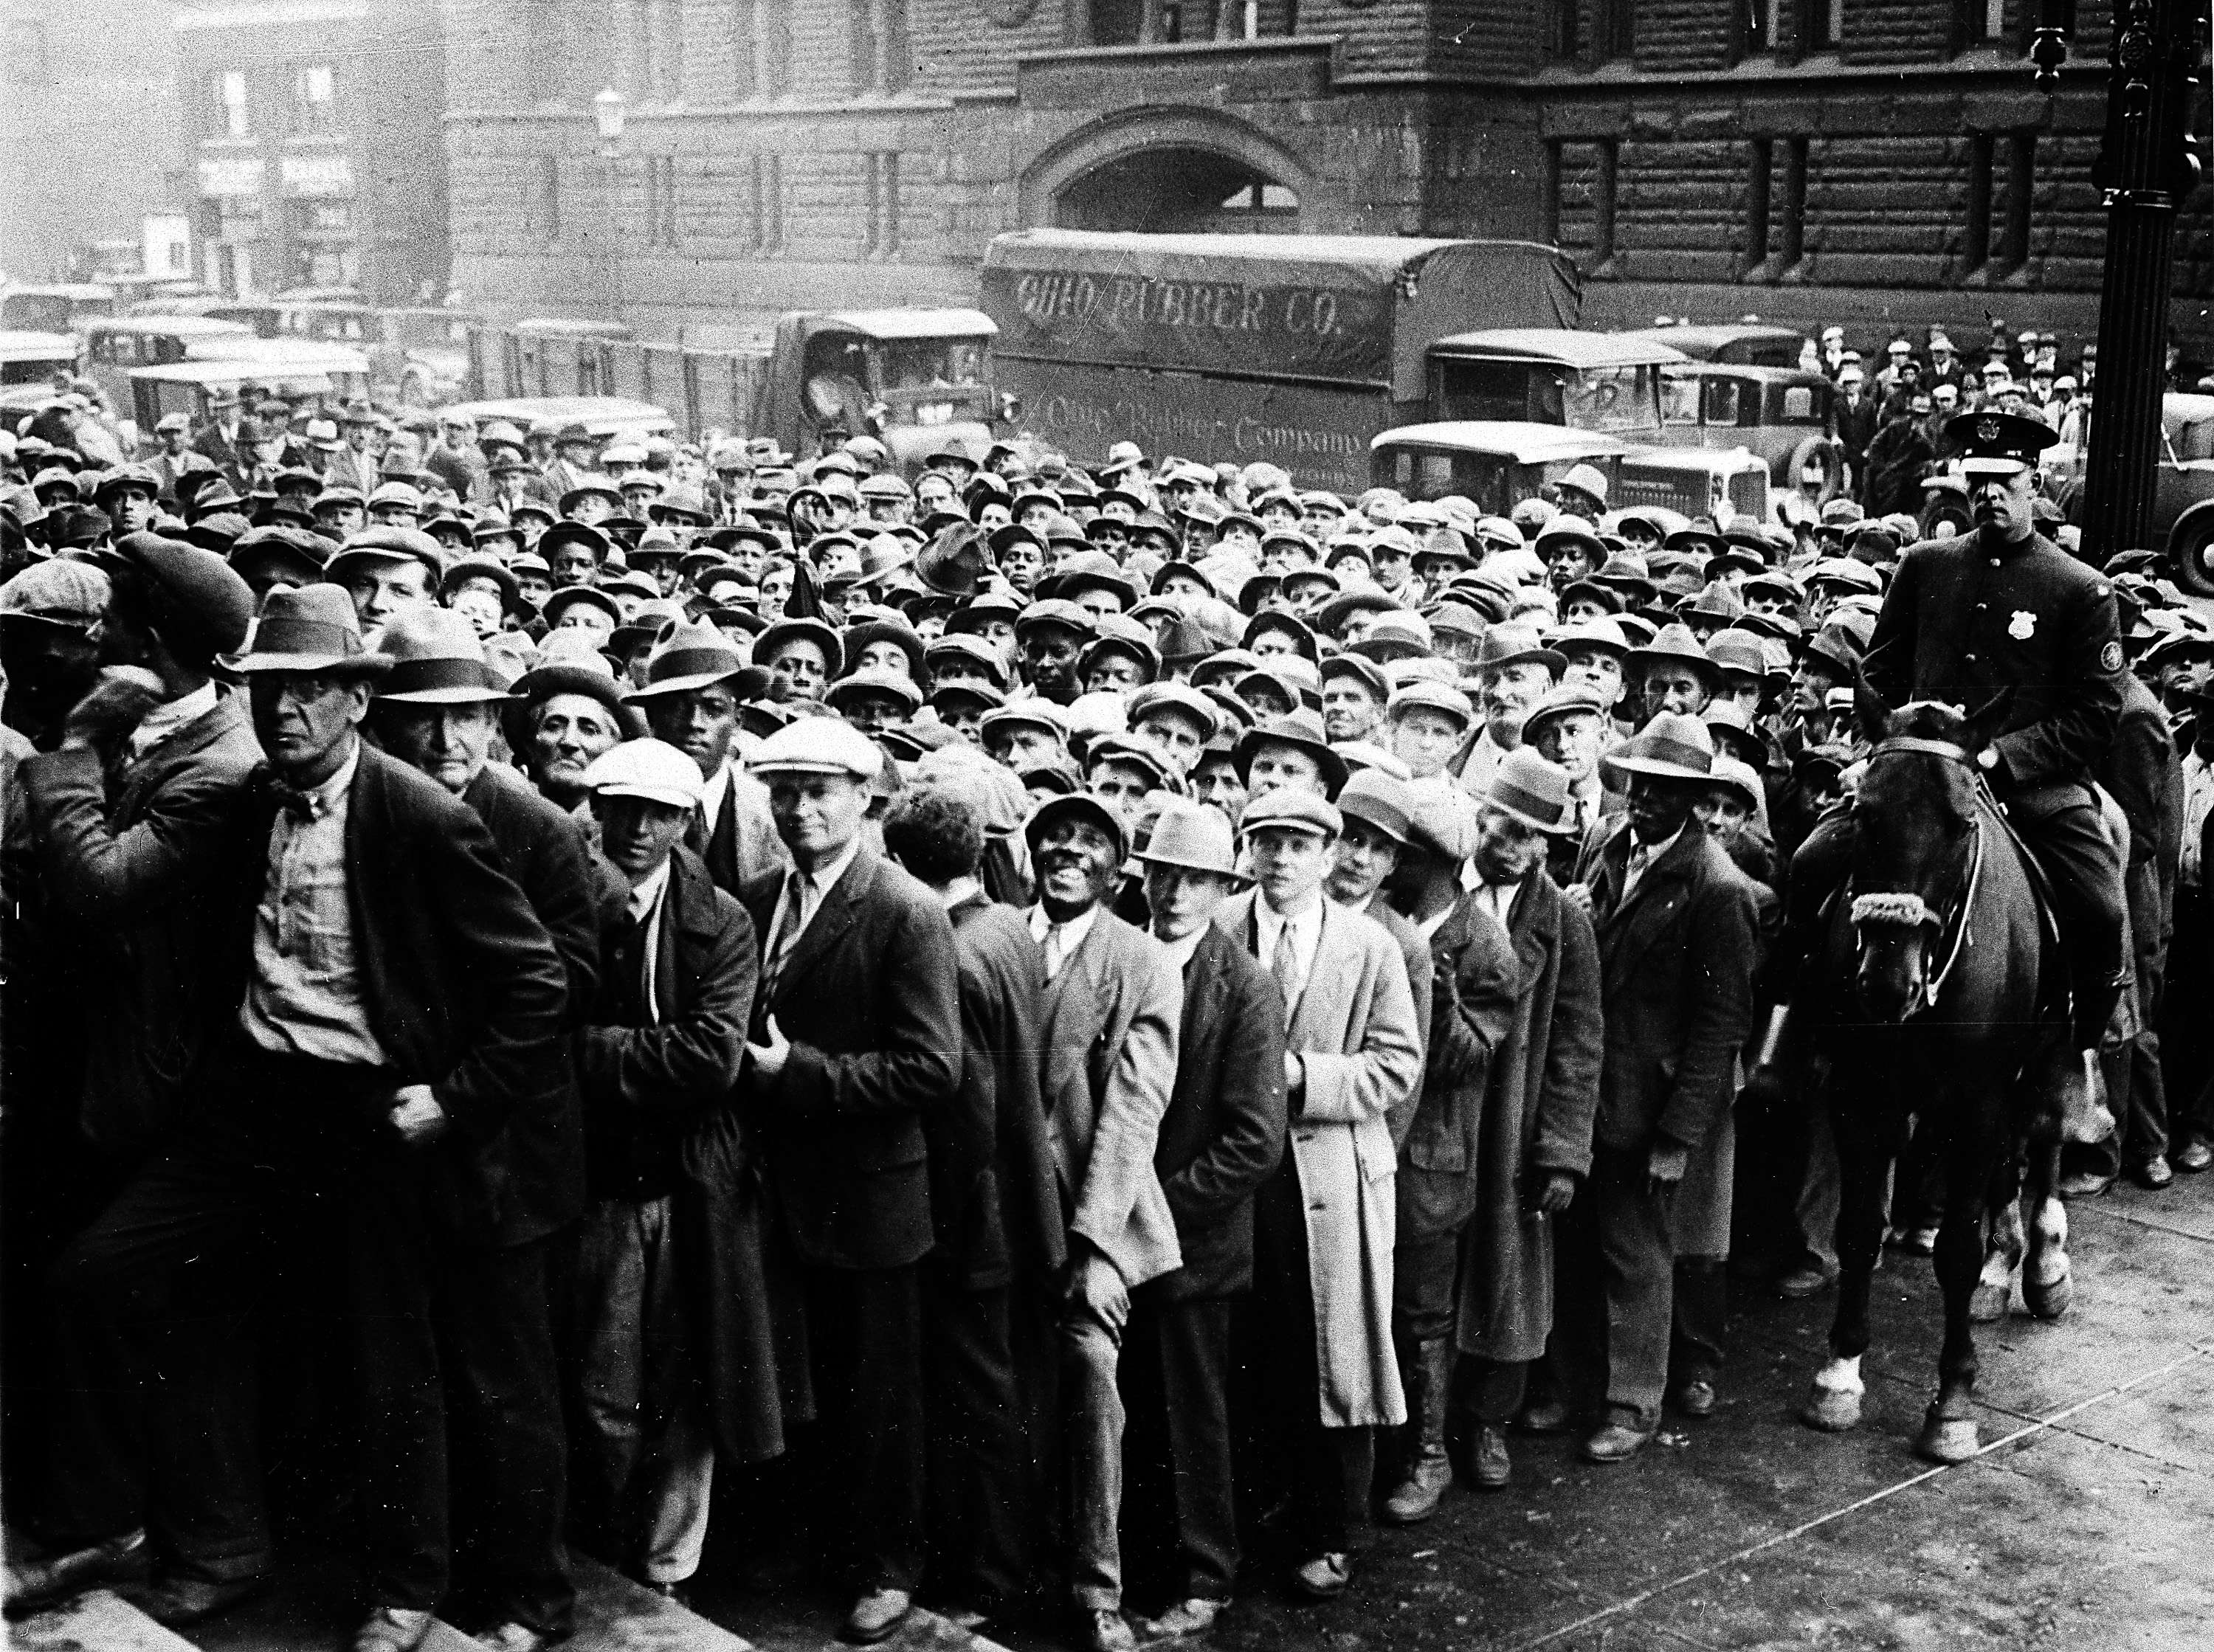 Thousands queue for jobs during the Great Depression in the US. Photo: AP